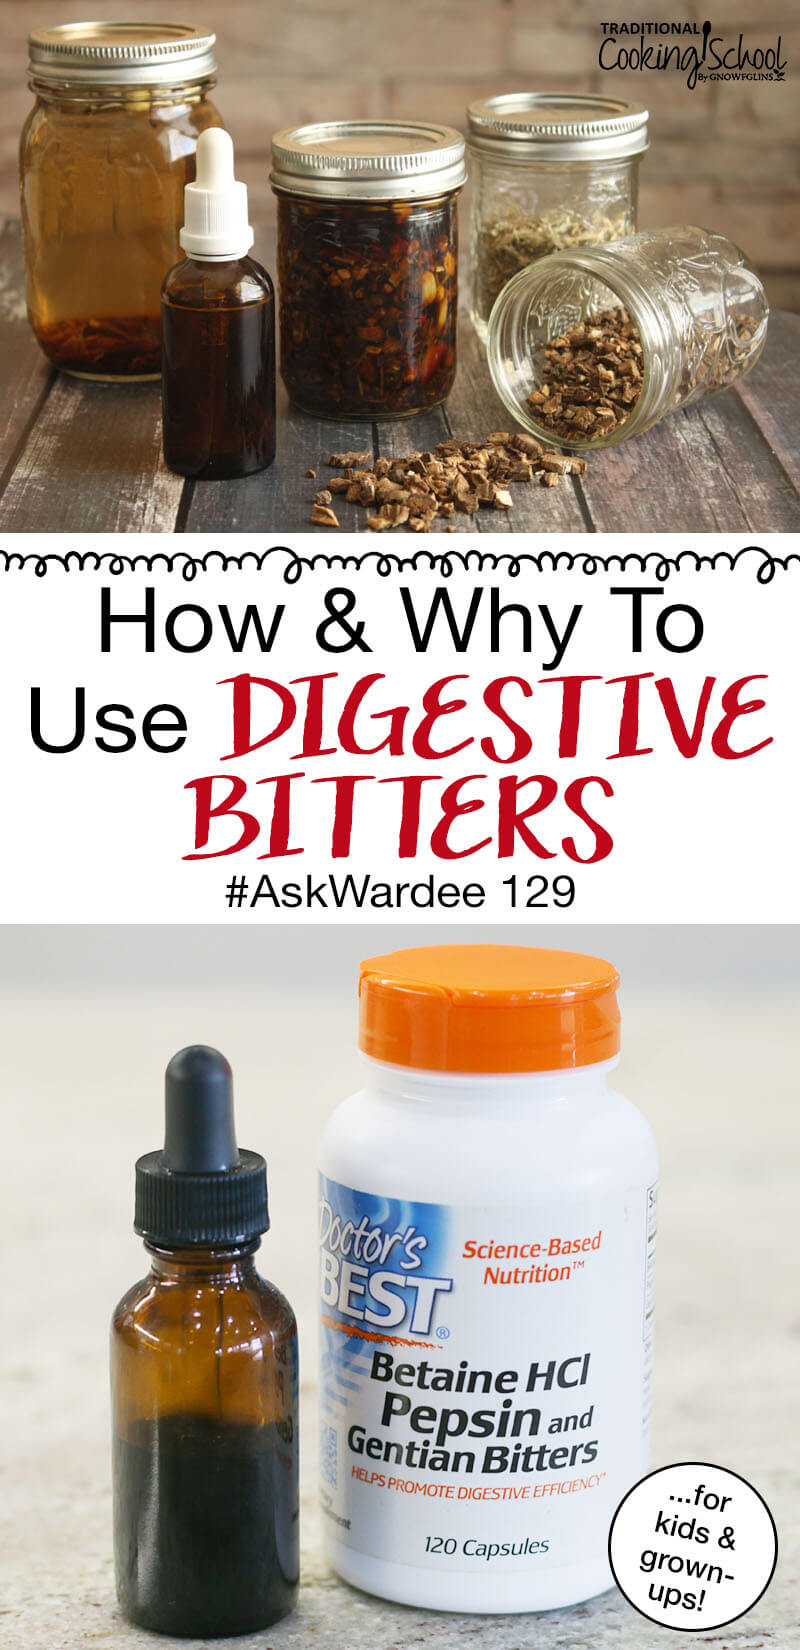 photo collage of tinctures in glass bottles next to a white plastic bottle of Betain HCl Pepsin and Gentian Bitters on a counter with text overlay: "How & Why To Use Digestive Bitters #AskWardee 129 (...for kids & grown-ups!)"